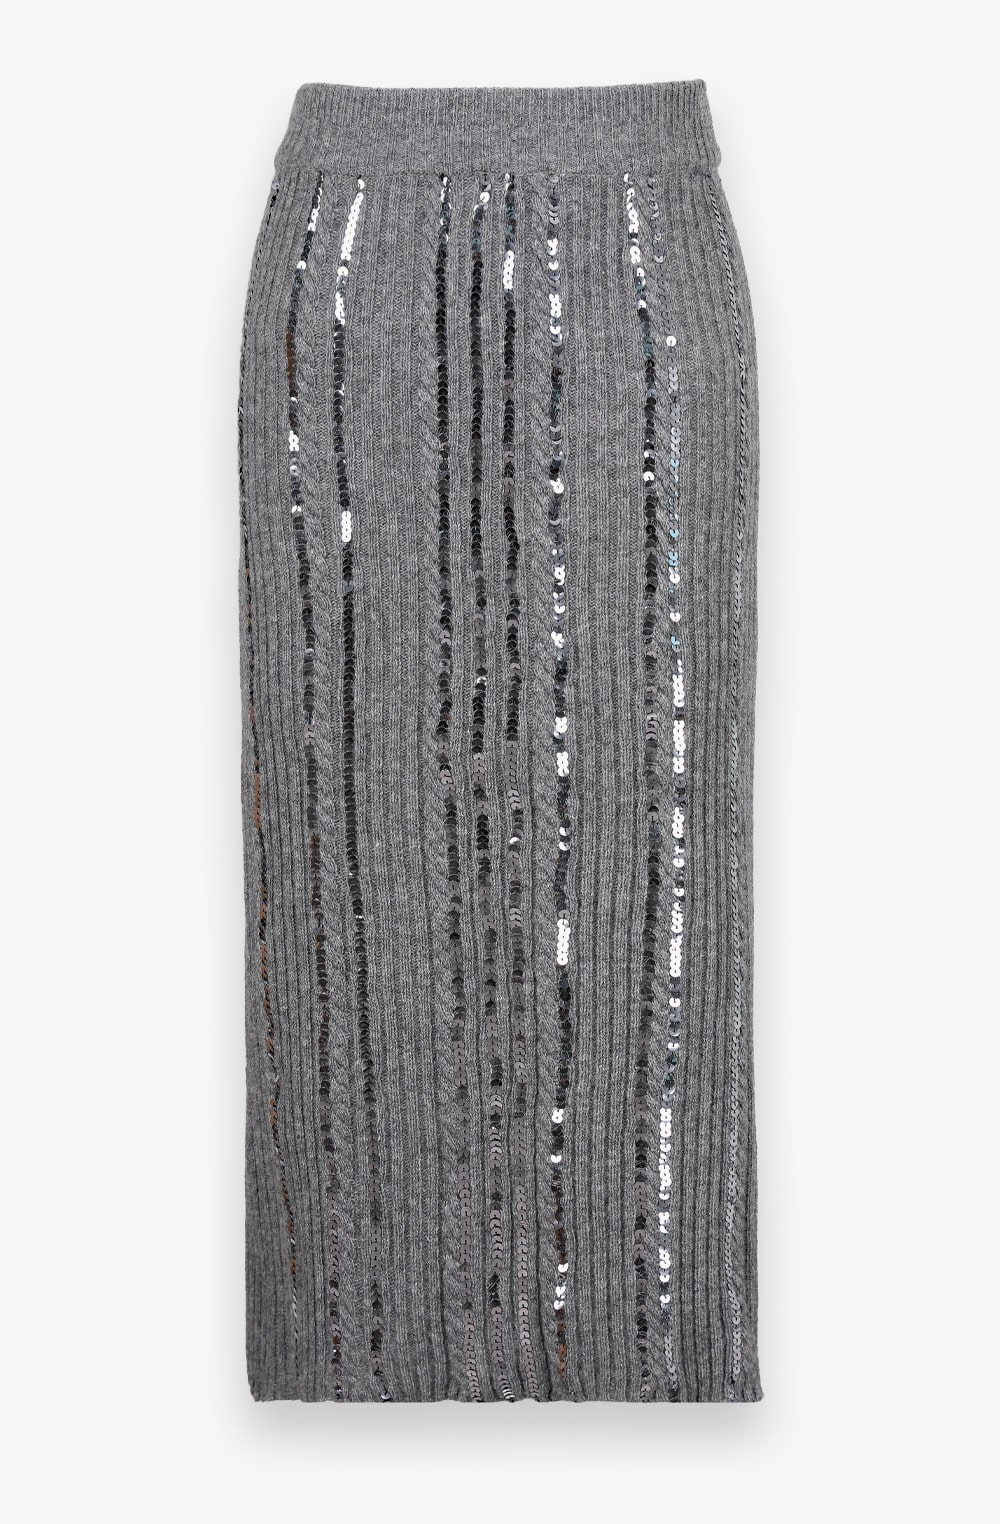 HIGH QUALITY LINE - Wool Cash Sequin Embellished Knit Skirt (GRAY)